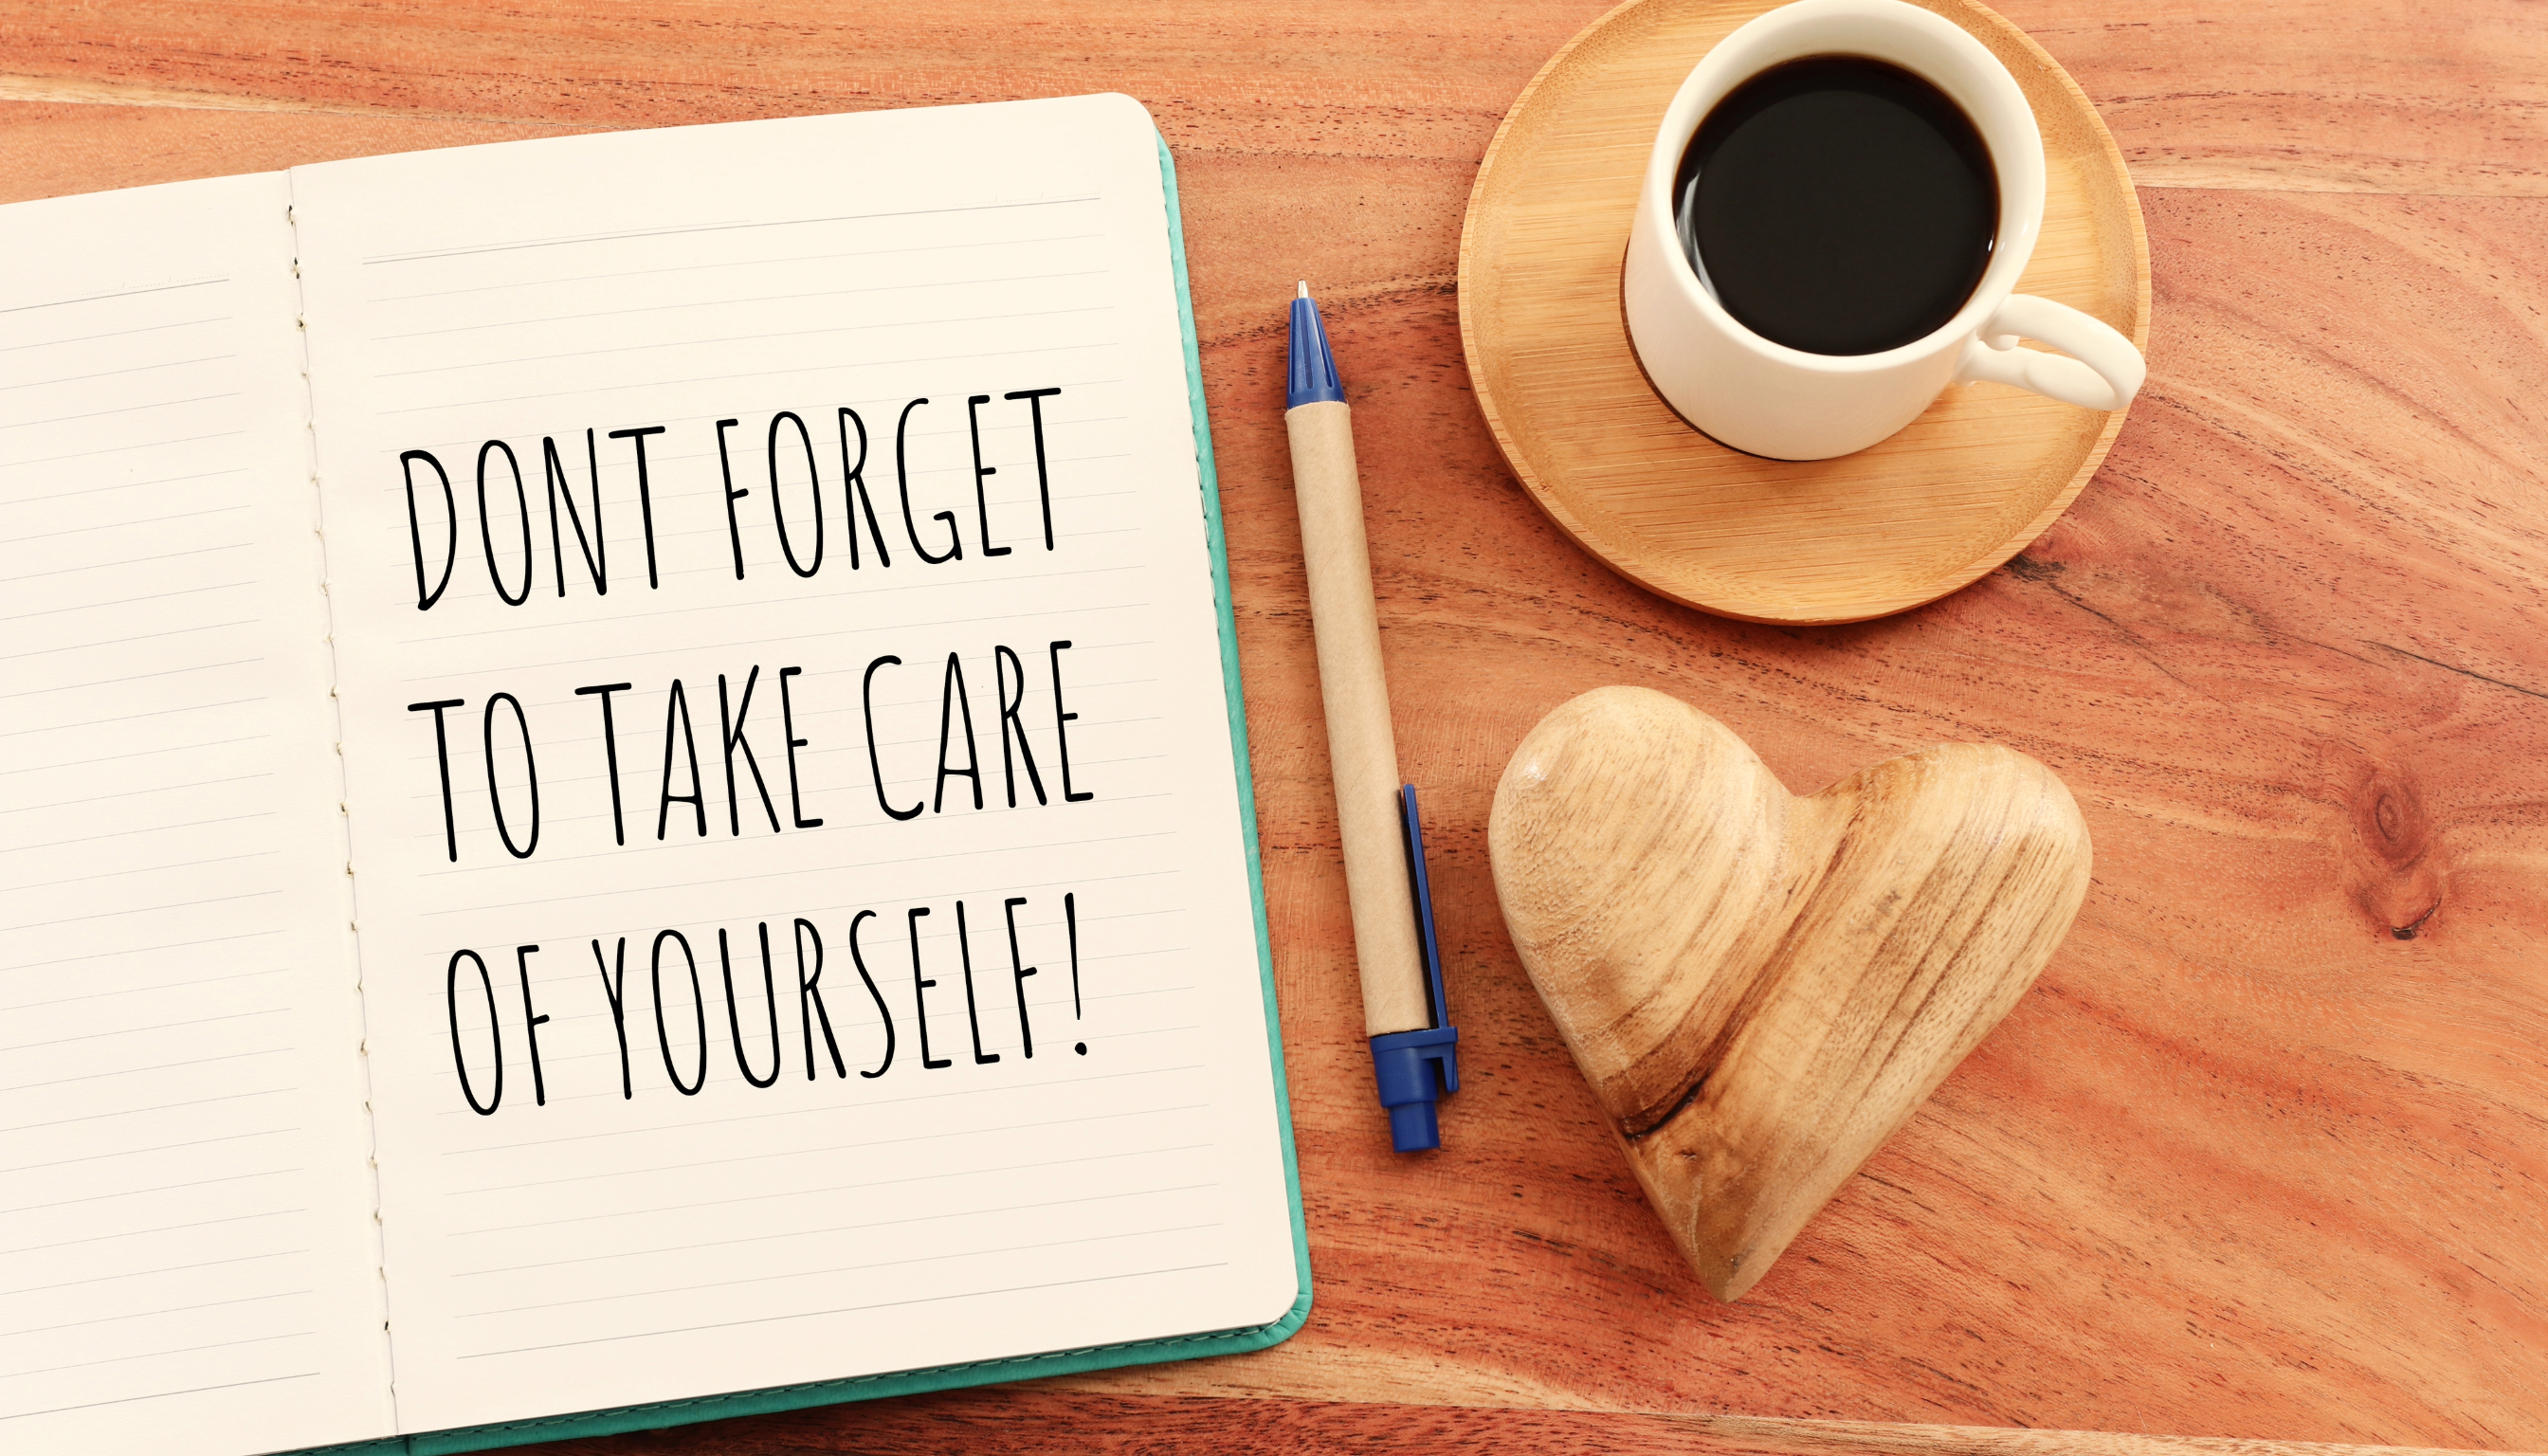 Integrating Self-Care Into Daily Life - Common Questions Concerns